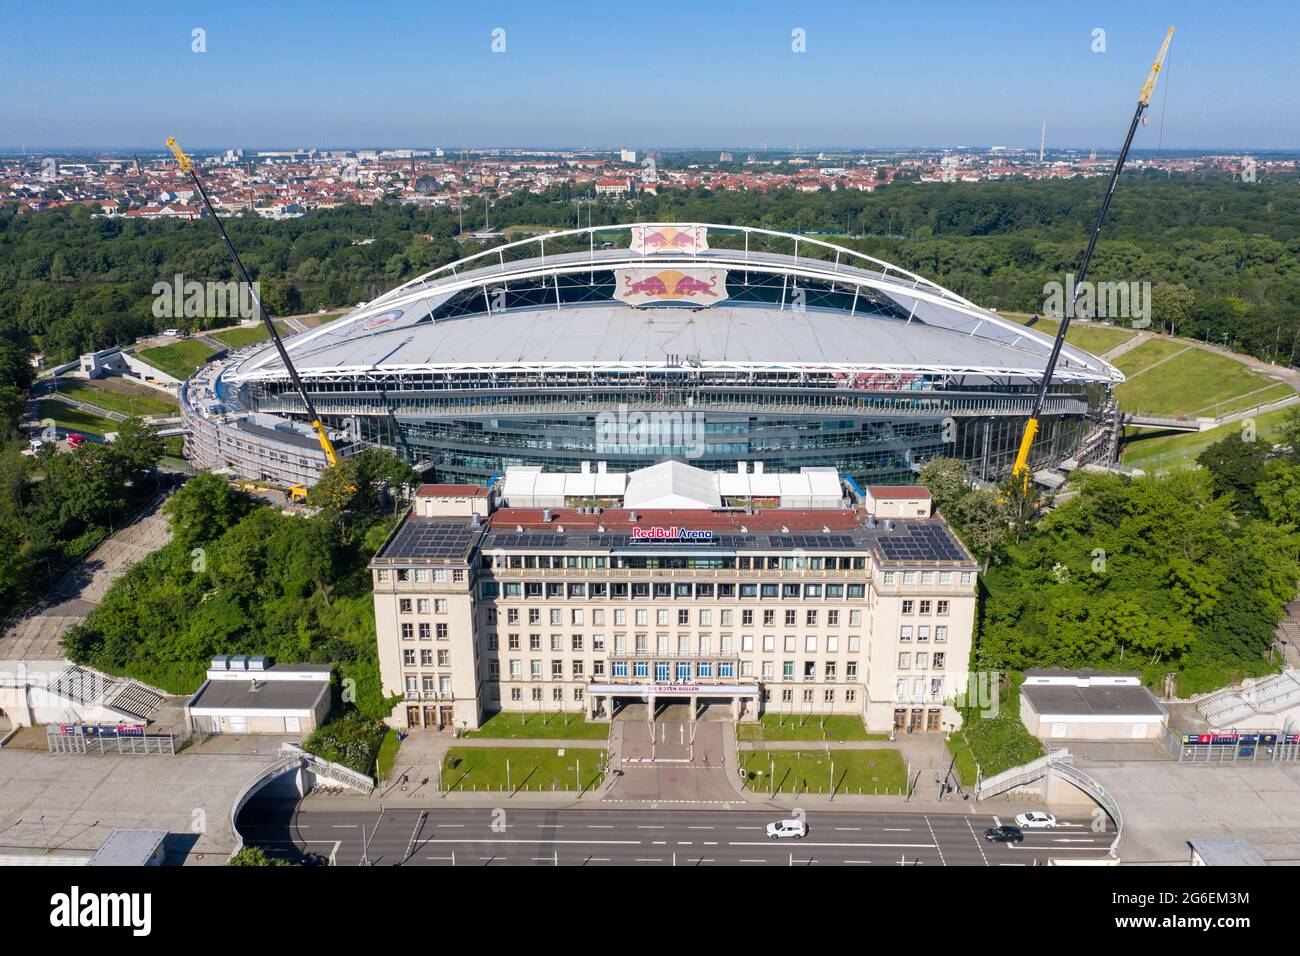 14 June 2021, Saxony, Leipzig: Football: Bundesliga, RB Leipzig. Two cranes are at the Red Bull Arena. The home ground of the Rasenballers is being rebuilt. The spectator capacity will increase from 42,558 to 47,069 in standing and seated areas. The outside of the stadium is enclosed with a soundproof facade. The embankment of the former Zentralstadion, which encompasses the arena, was cut open behind the historic bell tower to make room for a new entrance. RB Leipzig is investing a good 60 million euros in the conversion by 2022. (Aerial view with drone) Photo: Jan Woitas/dpa-Zentralbild/dpa Stock Photo